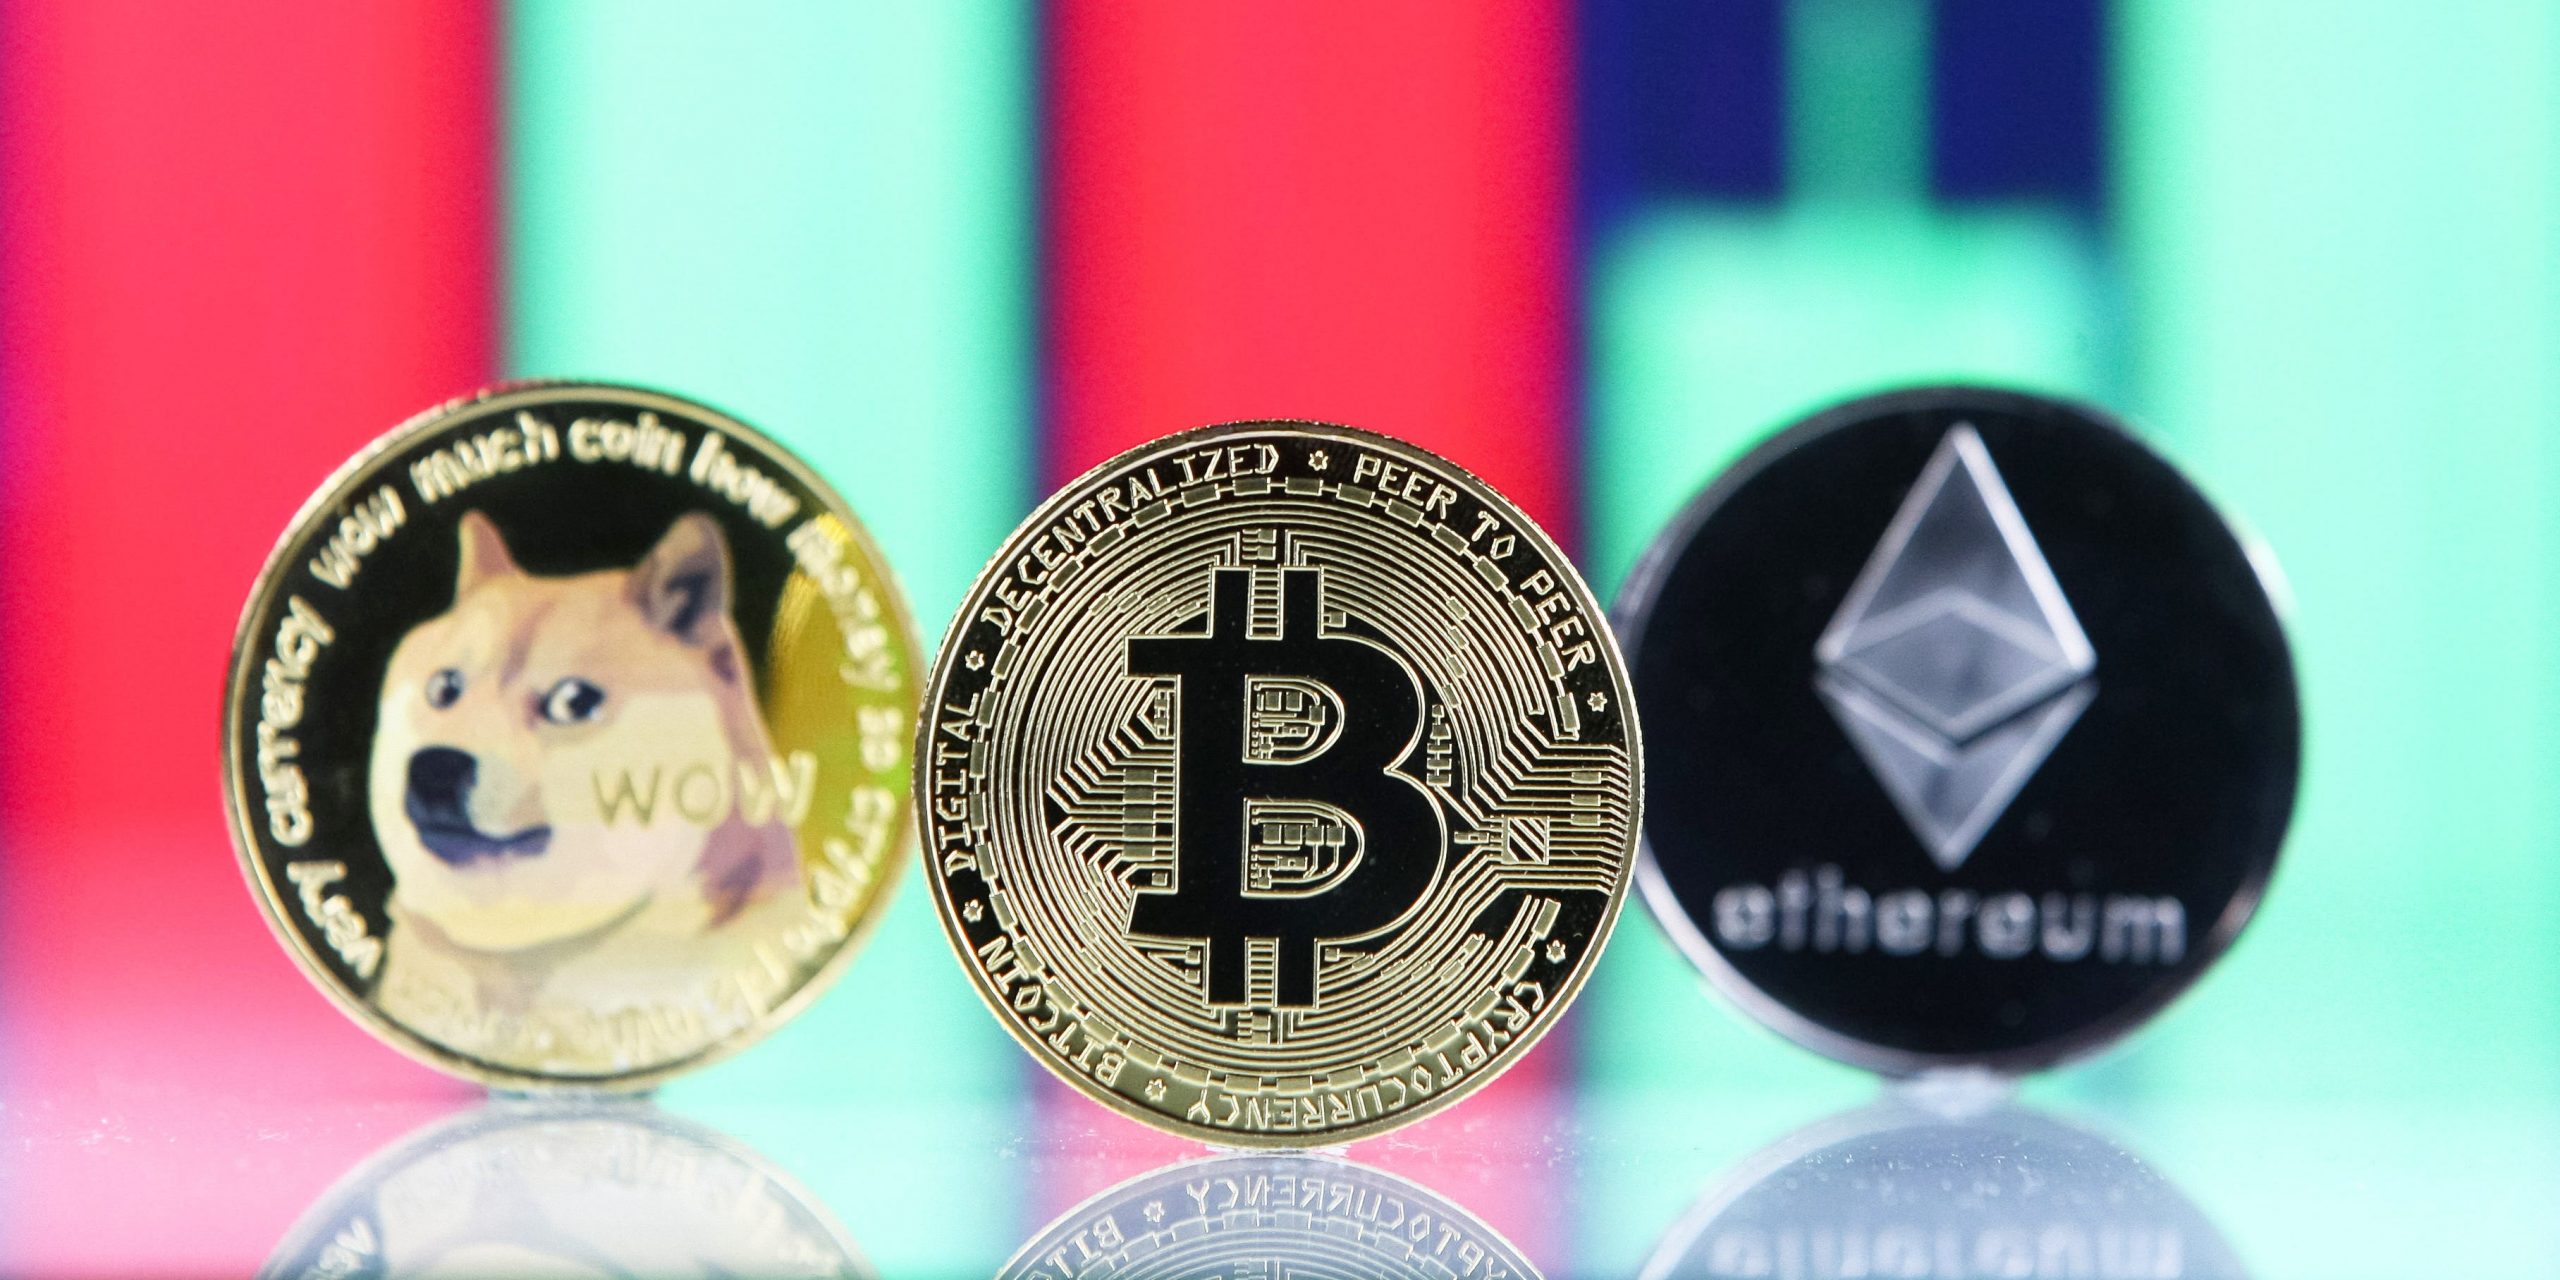 Bitcoin, Dogecoin, Ethereum cryptocurrency coins